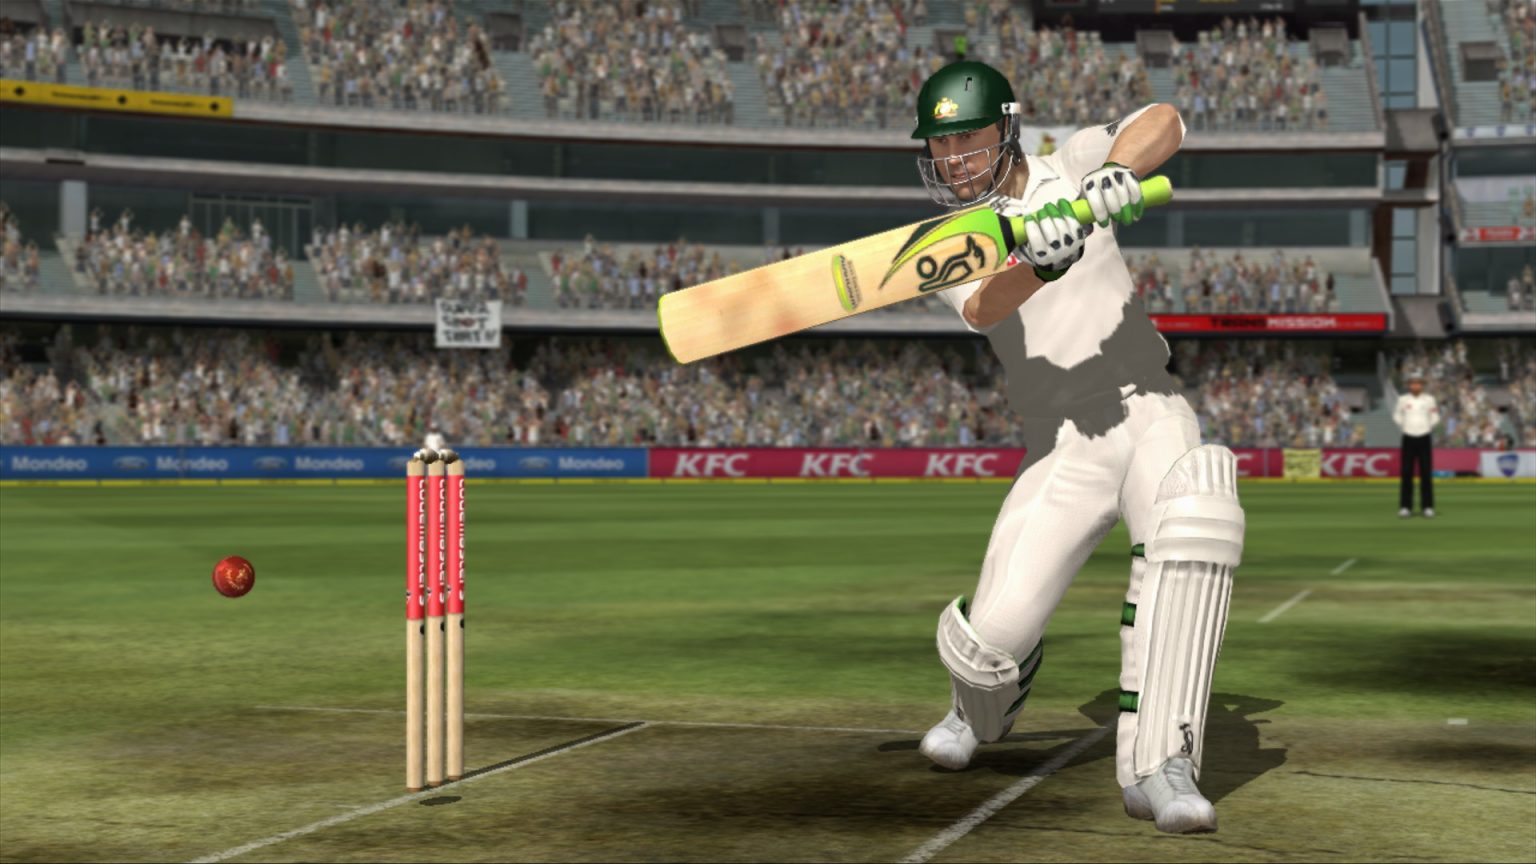 ashes cricket 2009 pc game free download full version